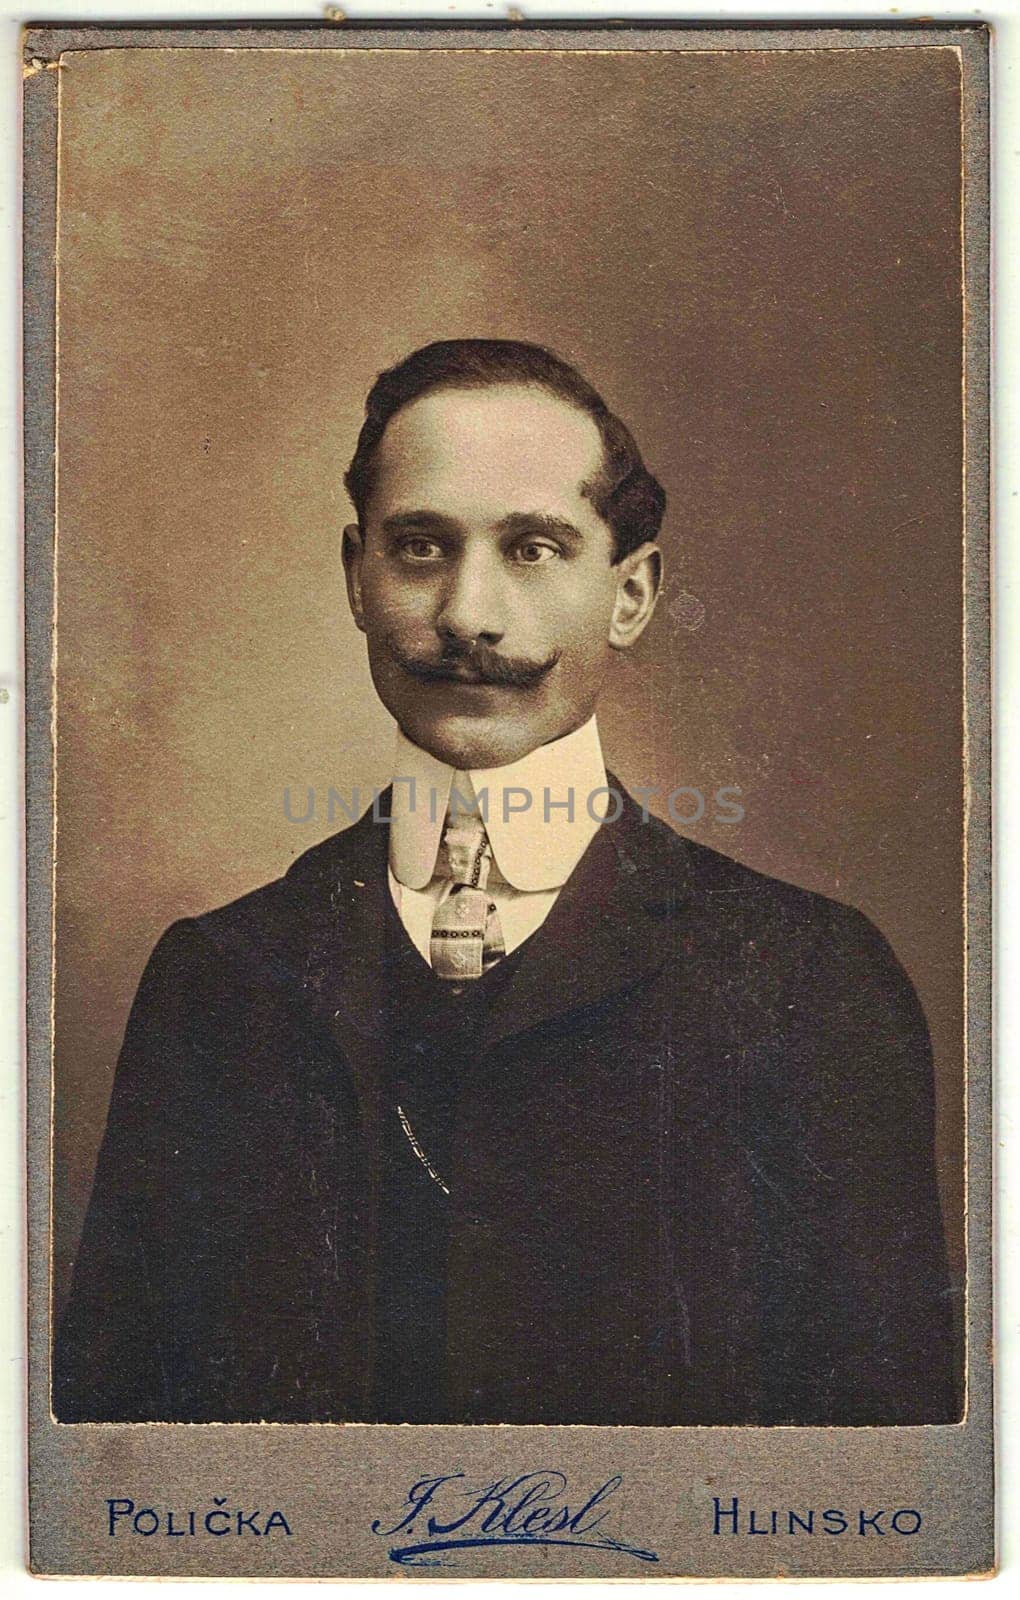 POLICKA - AUSTRIA - HUNGARY - CIRCA 1910: Vintage cabinet card shows portrait of the middle-aged man with moustache. Edwardian fashion. Photo was taken in a photo studio. Photo was taken in Austro-Hungarian Empire or also Austro-Hungarian Monarchy